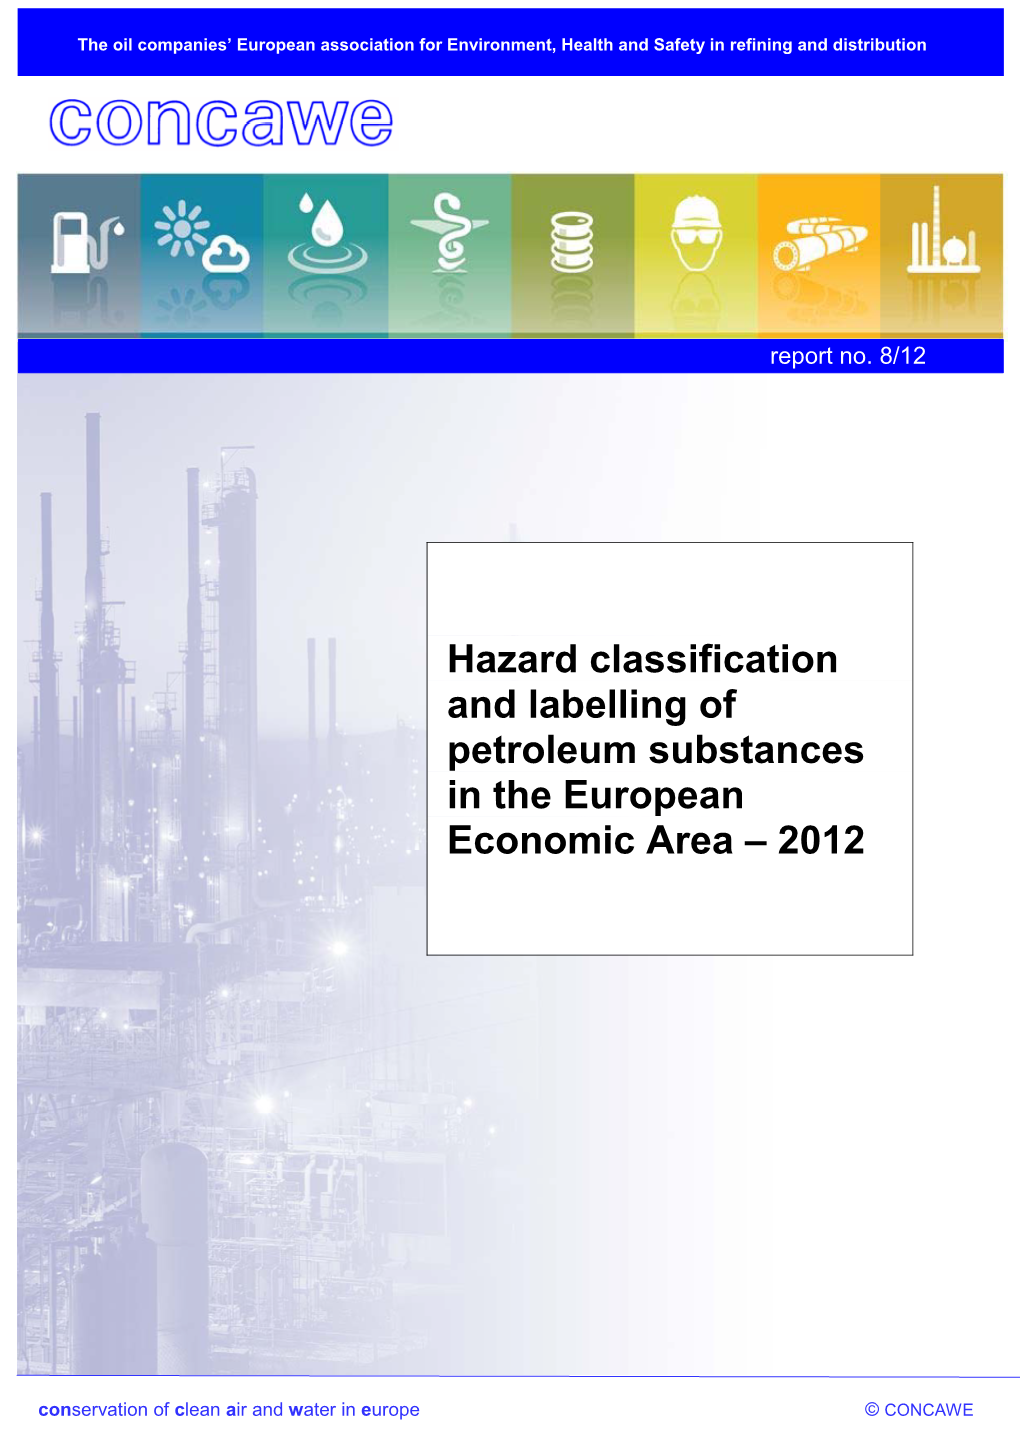 Hazard Classification and Labelling of Petroleum Substances in the European Economic Area – 2012